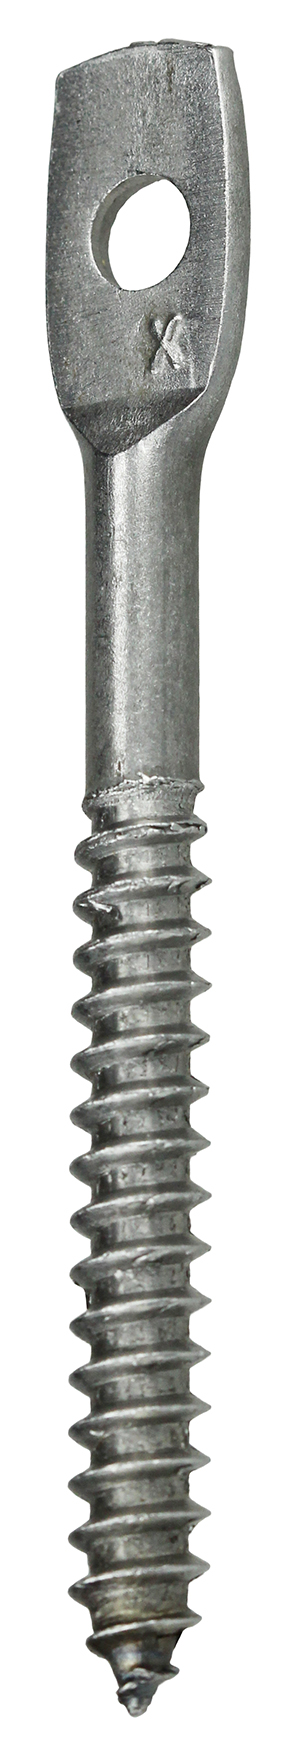 Flat Hanger Screw, Steel material, 1/4 x 3 in. Size, 3 in. length, Flat head type, Zinc Plated Finish